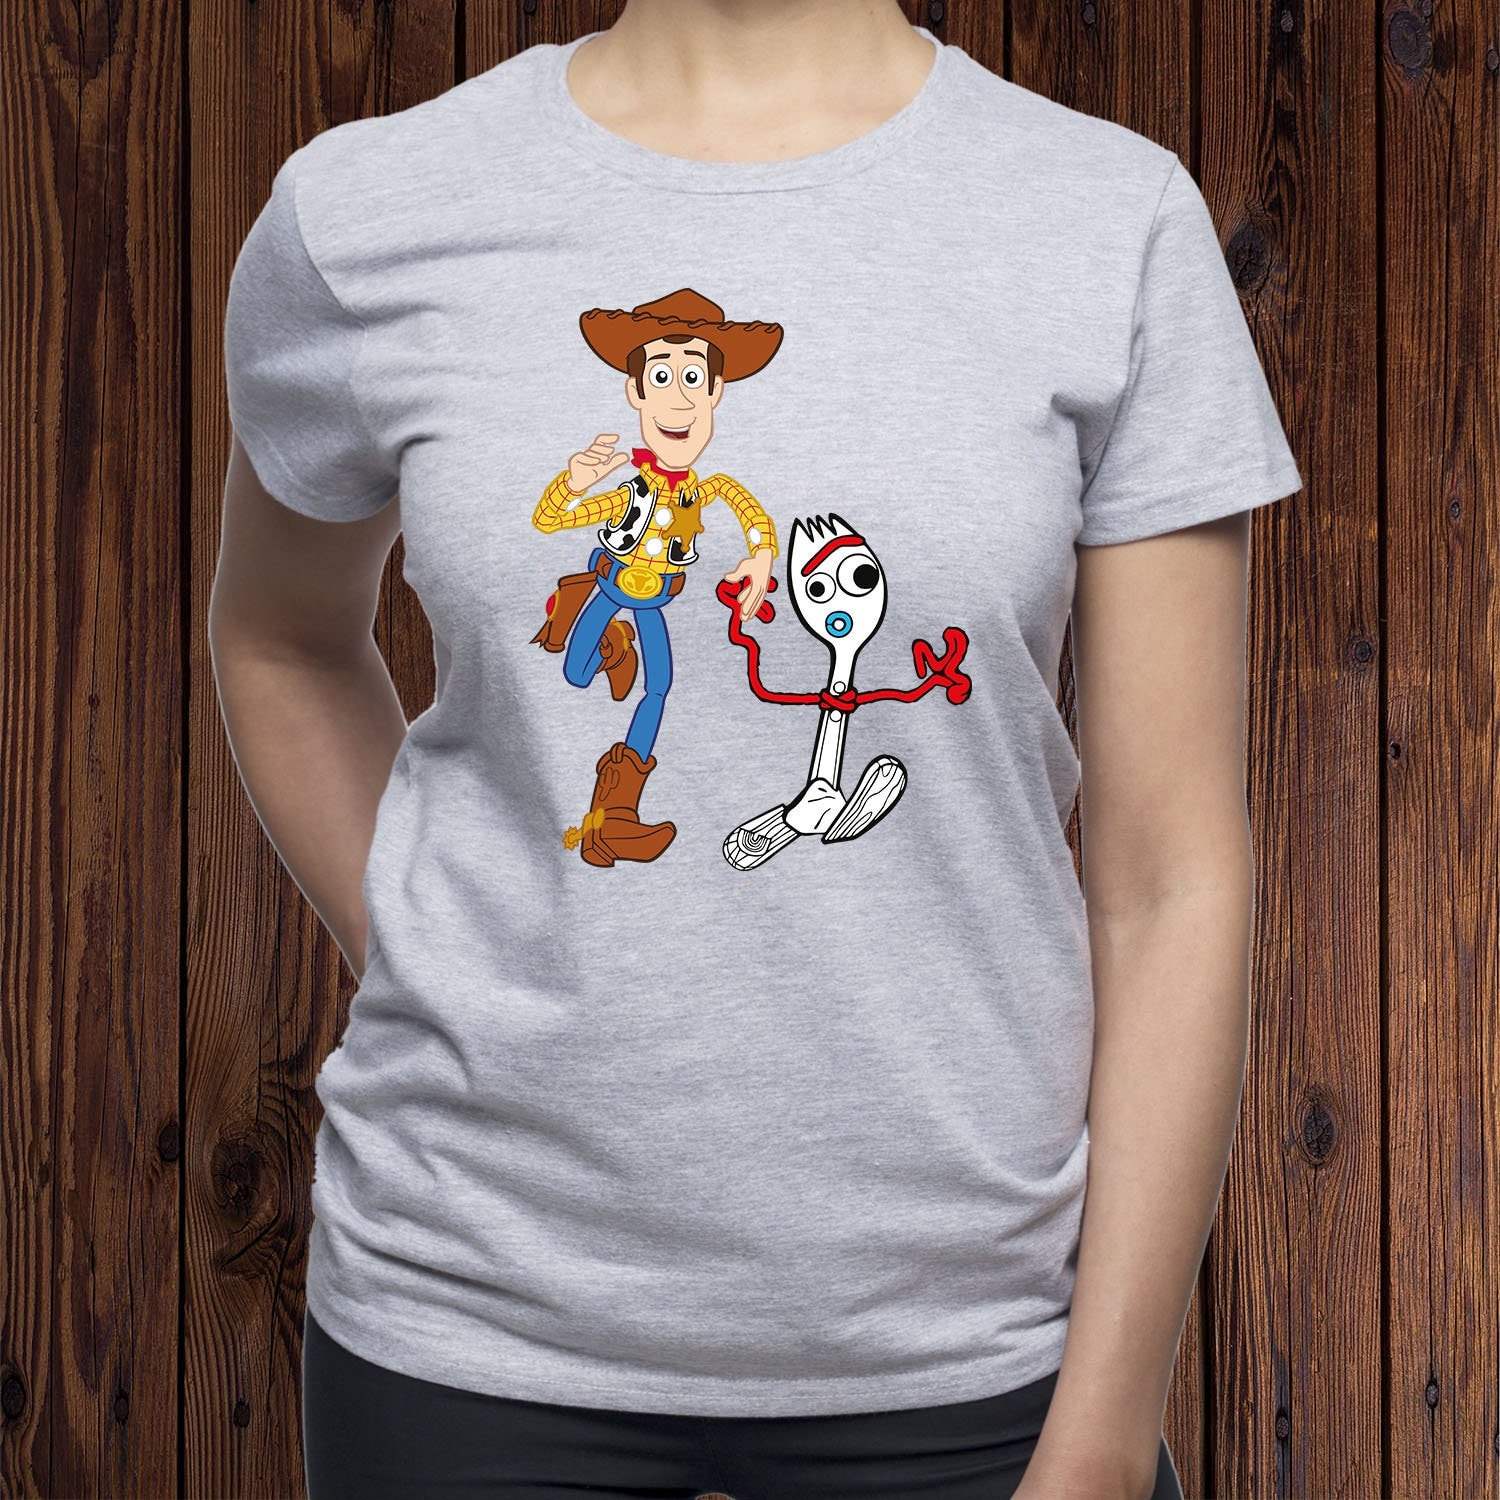 Woody and Forky Sweatshirt/ Woody Hoodie/ Forky Jumper/ Toy Story Pullover/  Toy Story Friends Sweater/ Cowbay Hoody/ Spork Jumper/ T80 